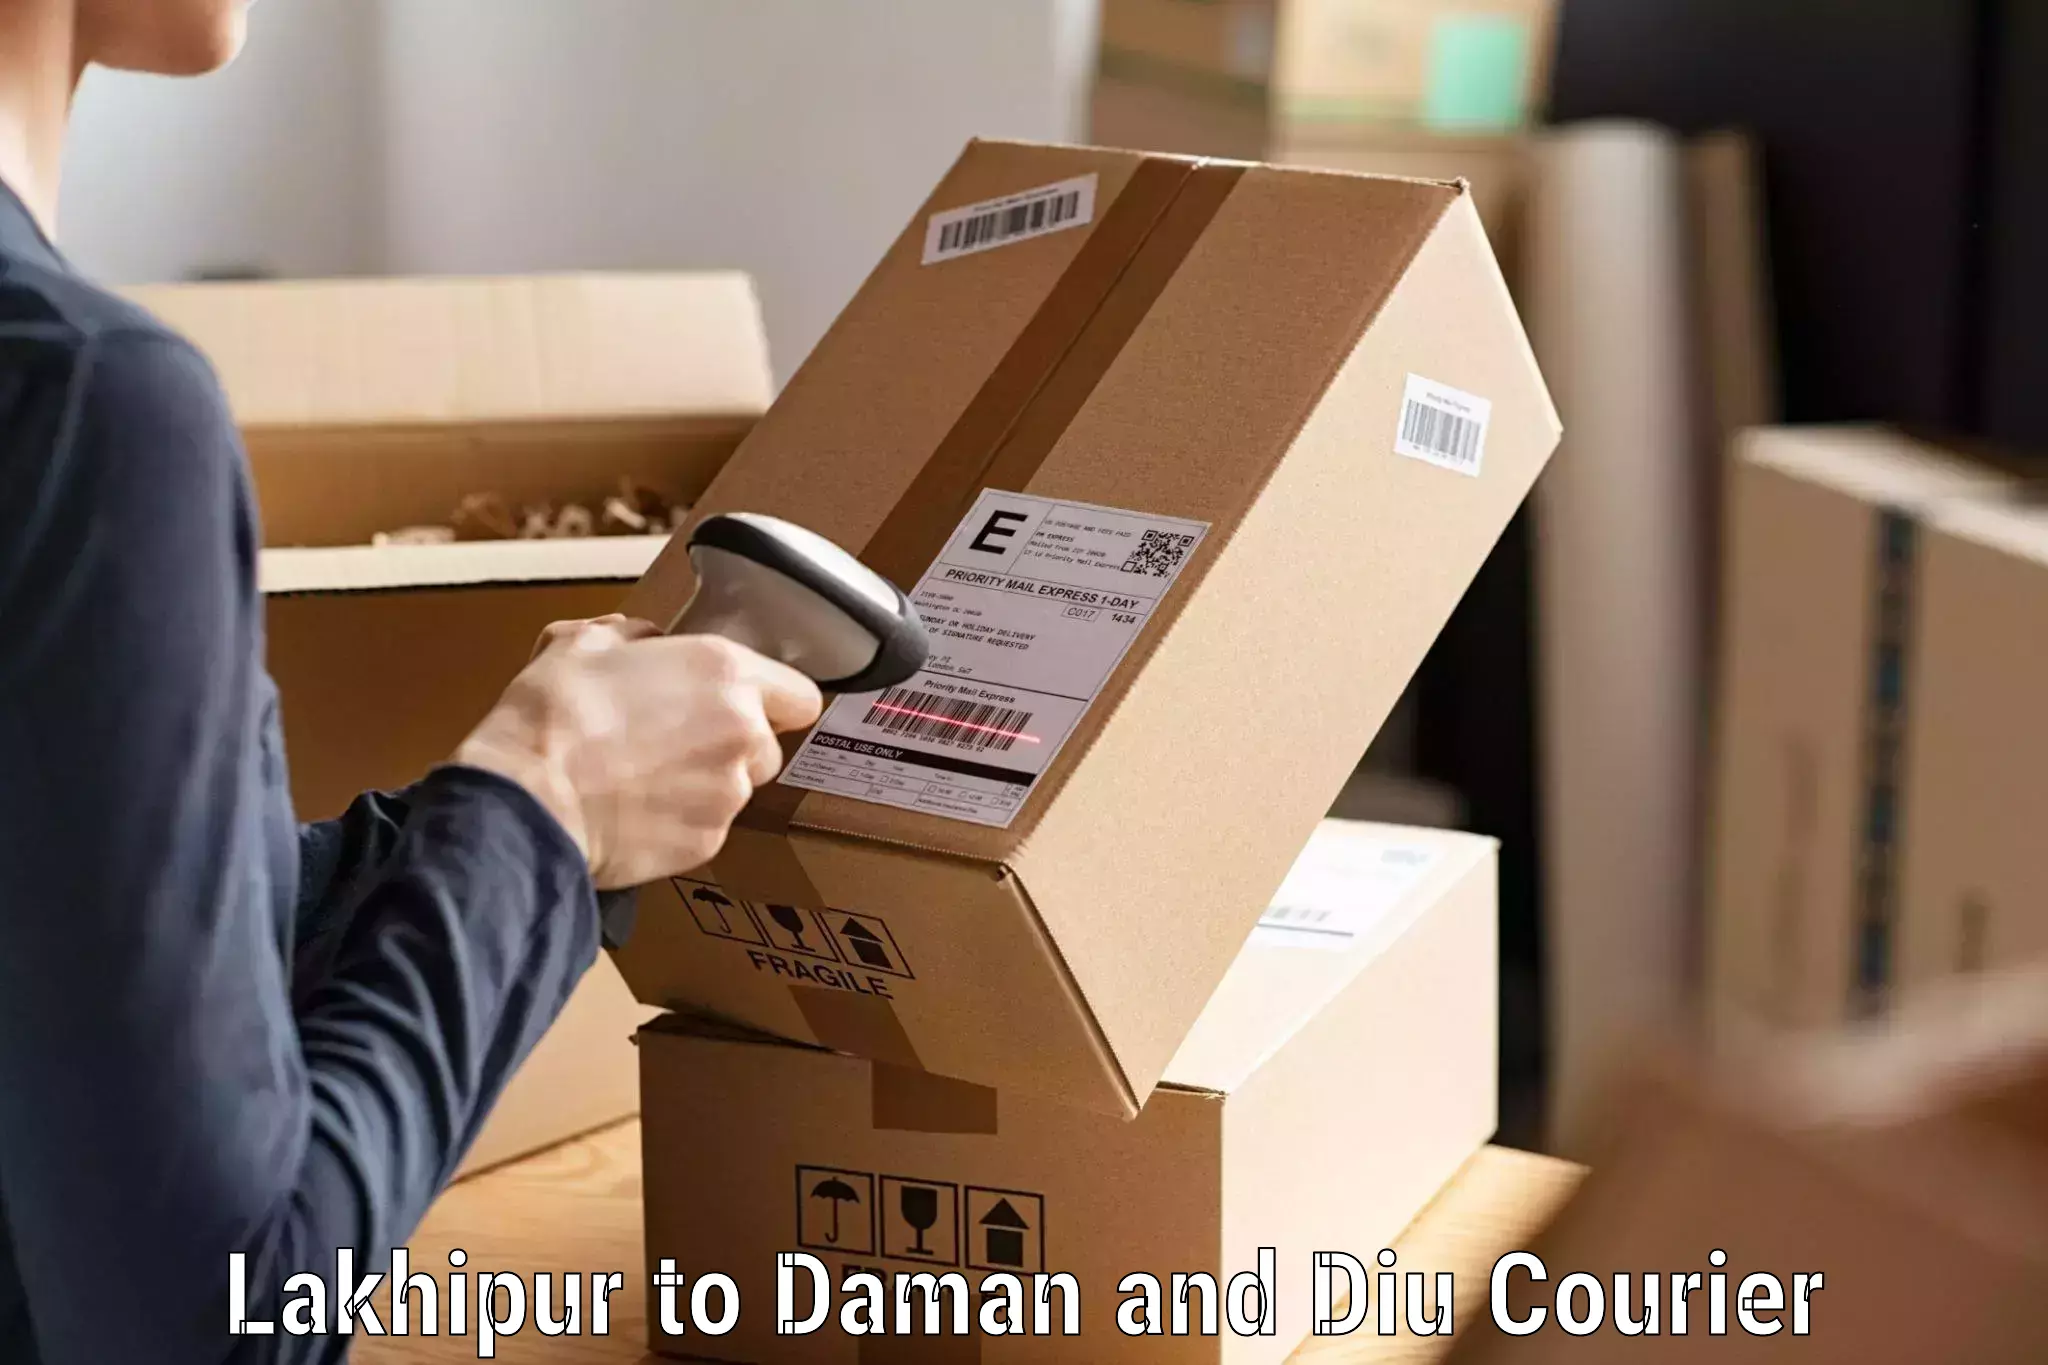 User-friendly delivery service Lakhipur to Daman